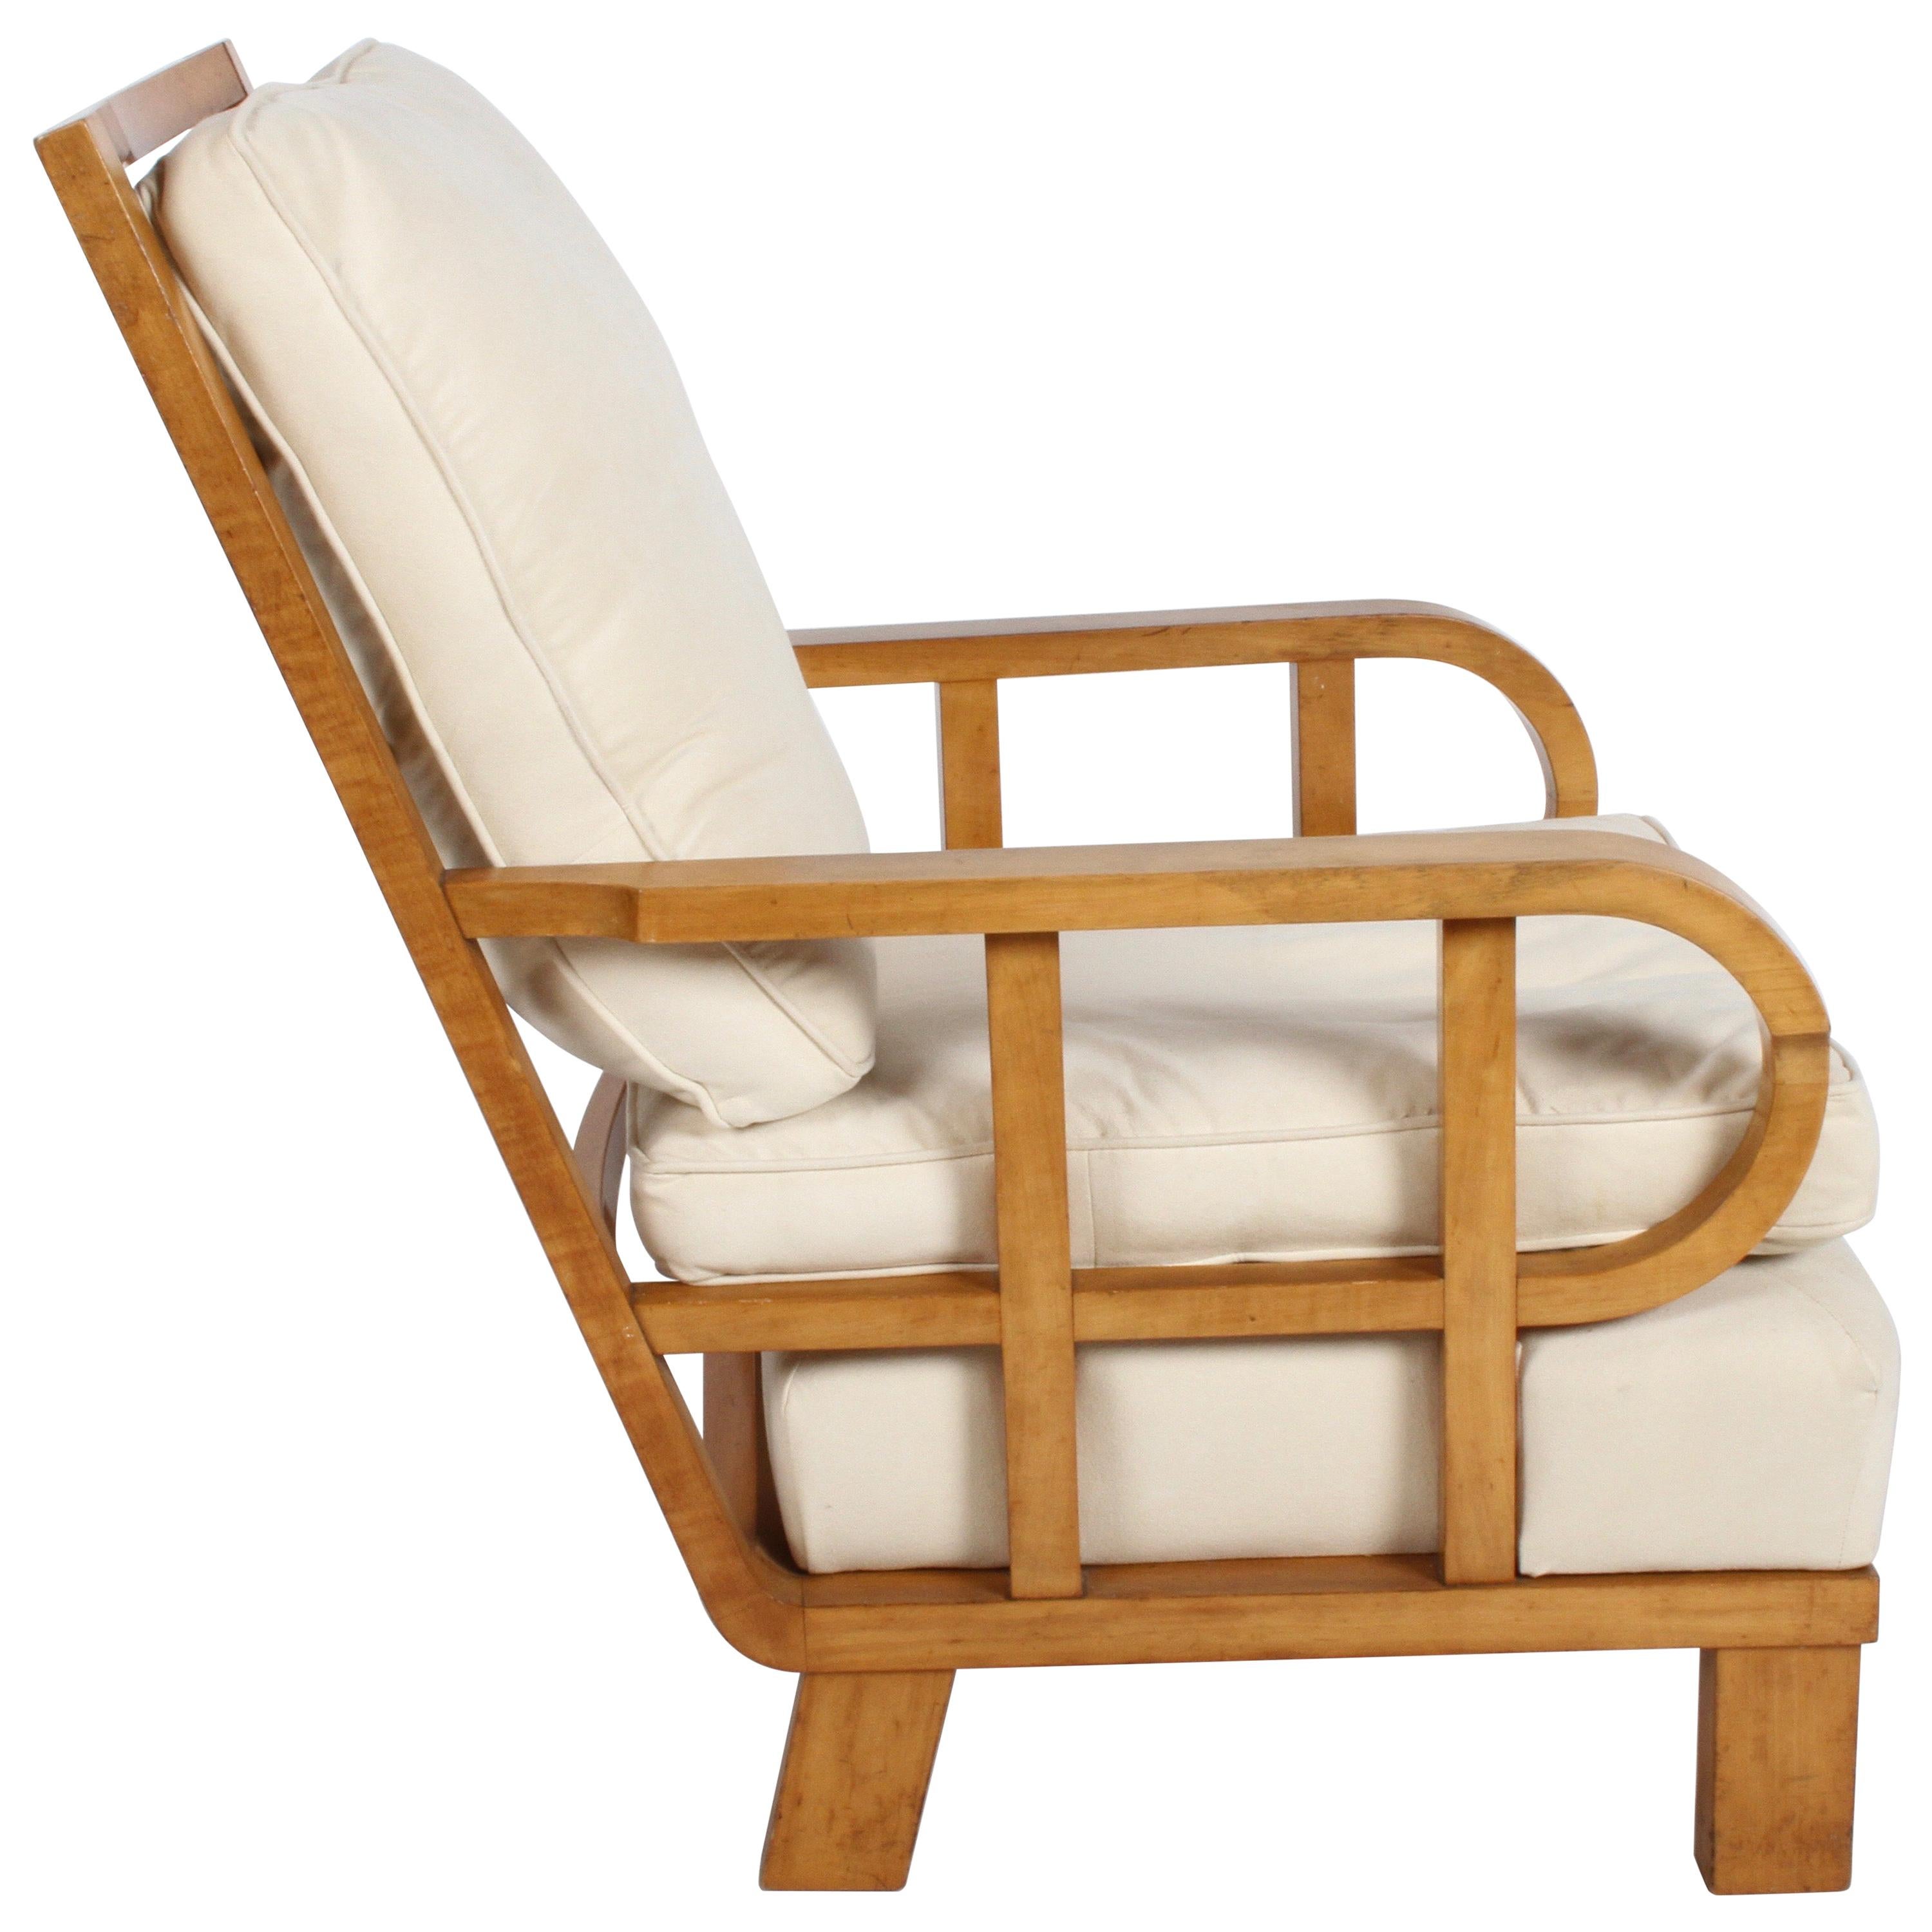 Vienna Secession Lounge or Club chair in Beechwood and Off White Suede